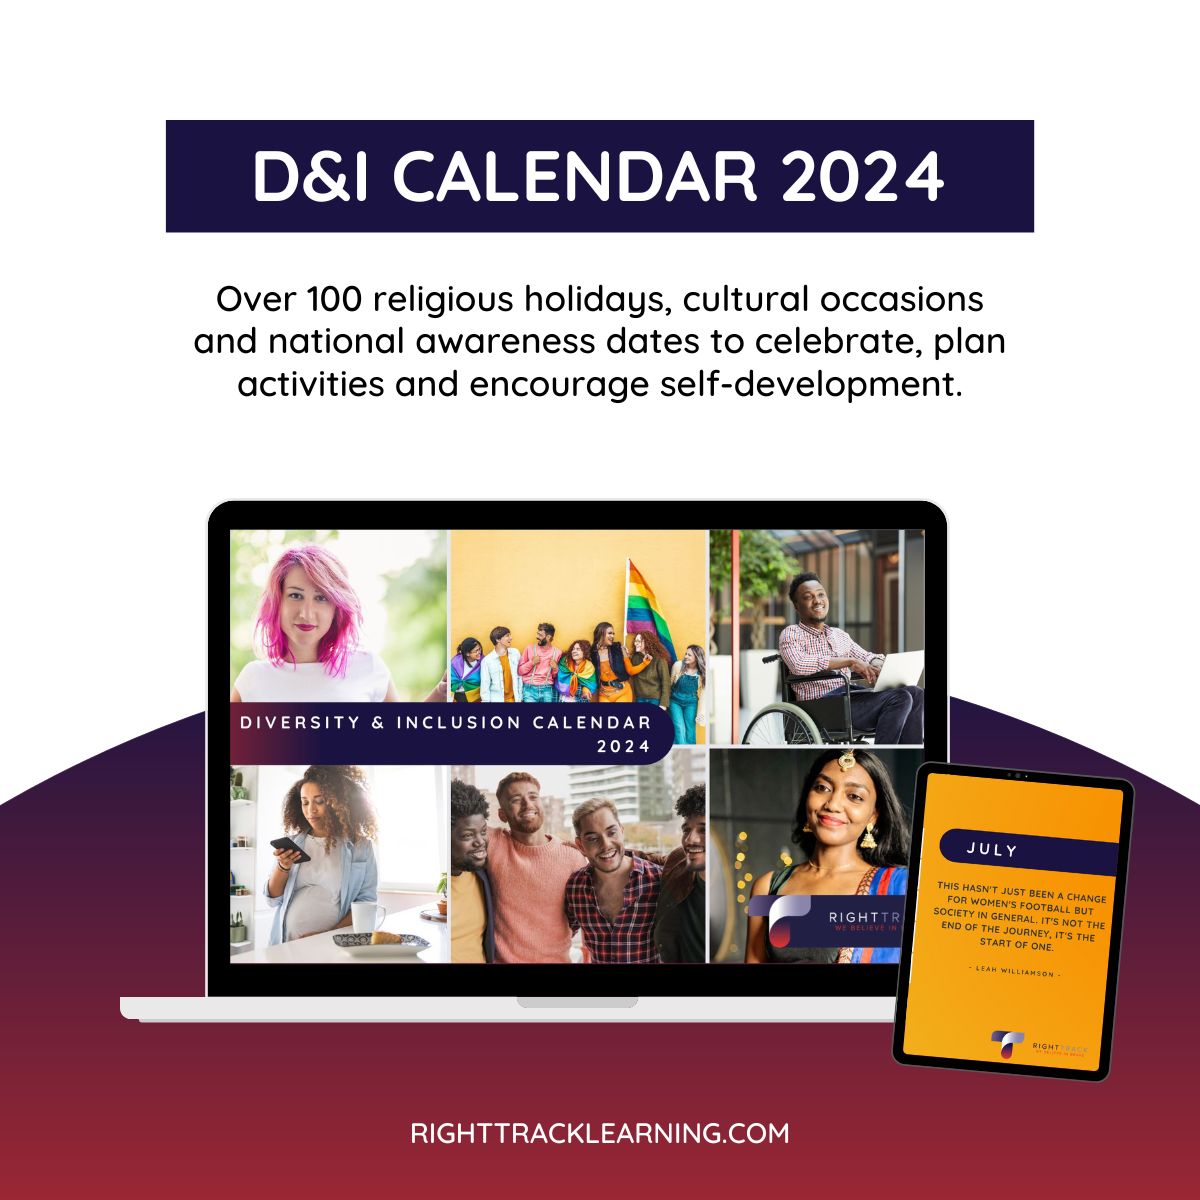 Diversity and Inclusion Calendar 2024 RightTrack Learning